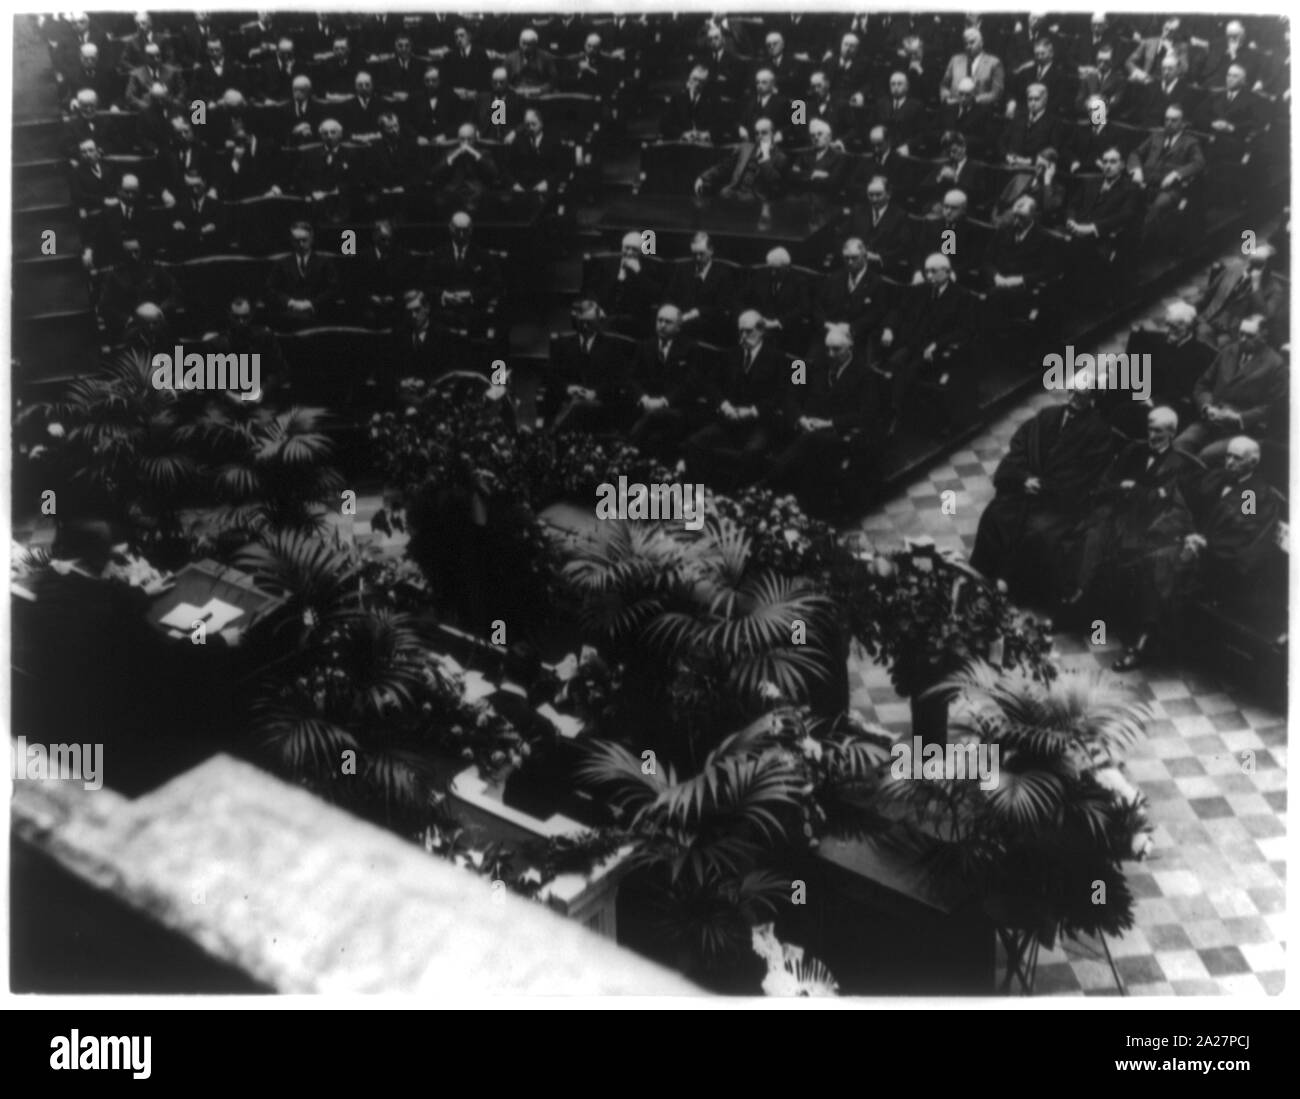 President Warren G. Harding, members of his cabinet, members of the Supreme Court, and other officials, at funeral of Congressman James R. Mann, in the U.S. House of Representatives, Washington, D.C. Stock Photo